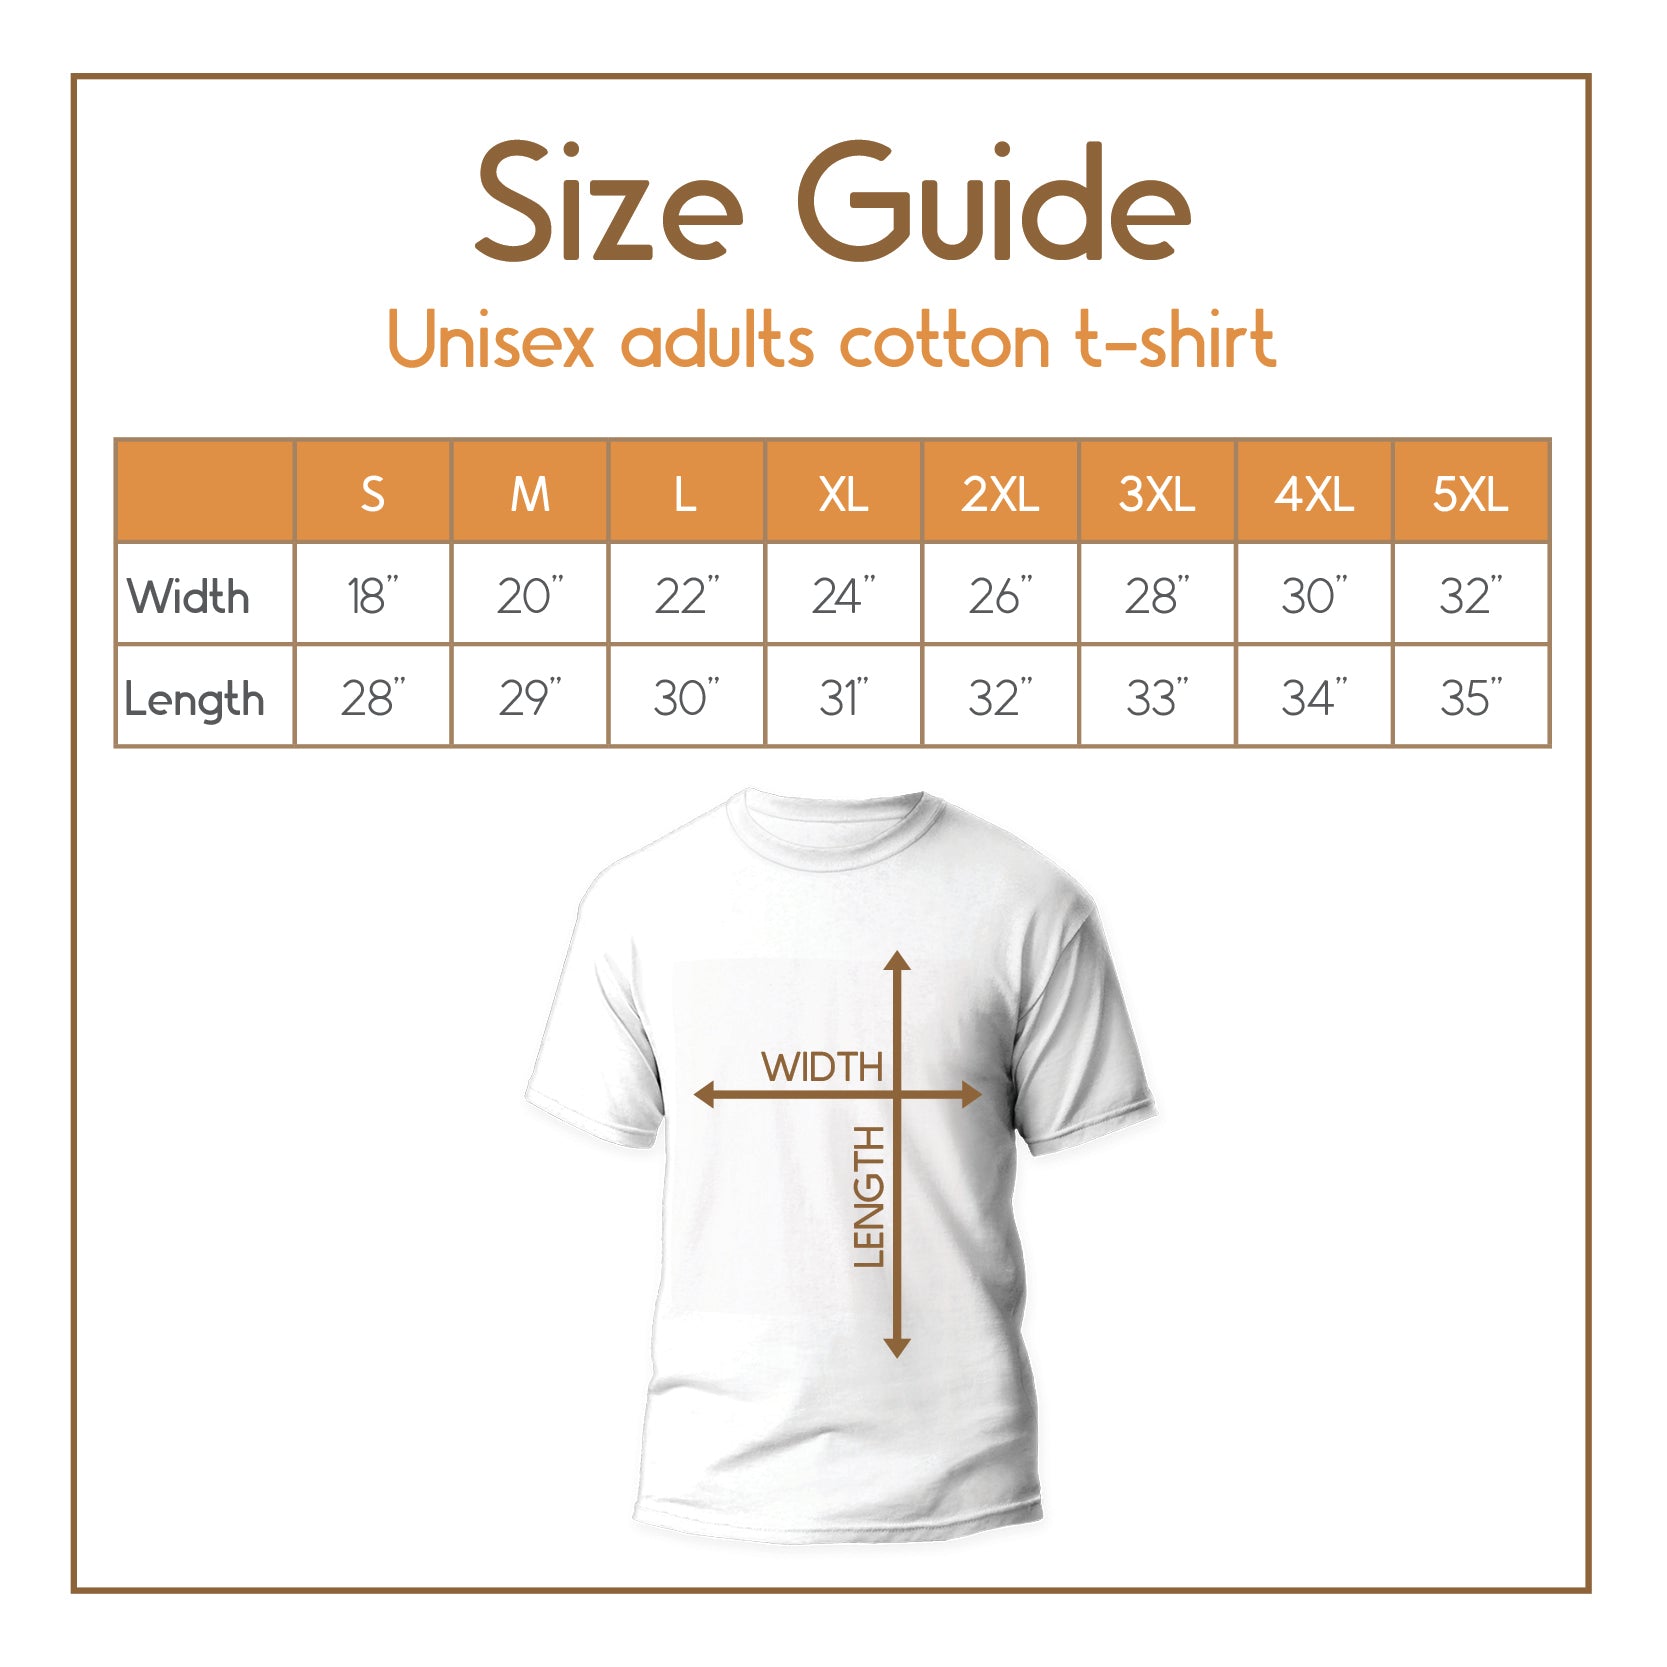 Size guide for fierce t-shirt